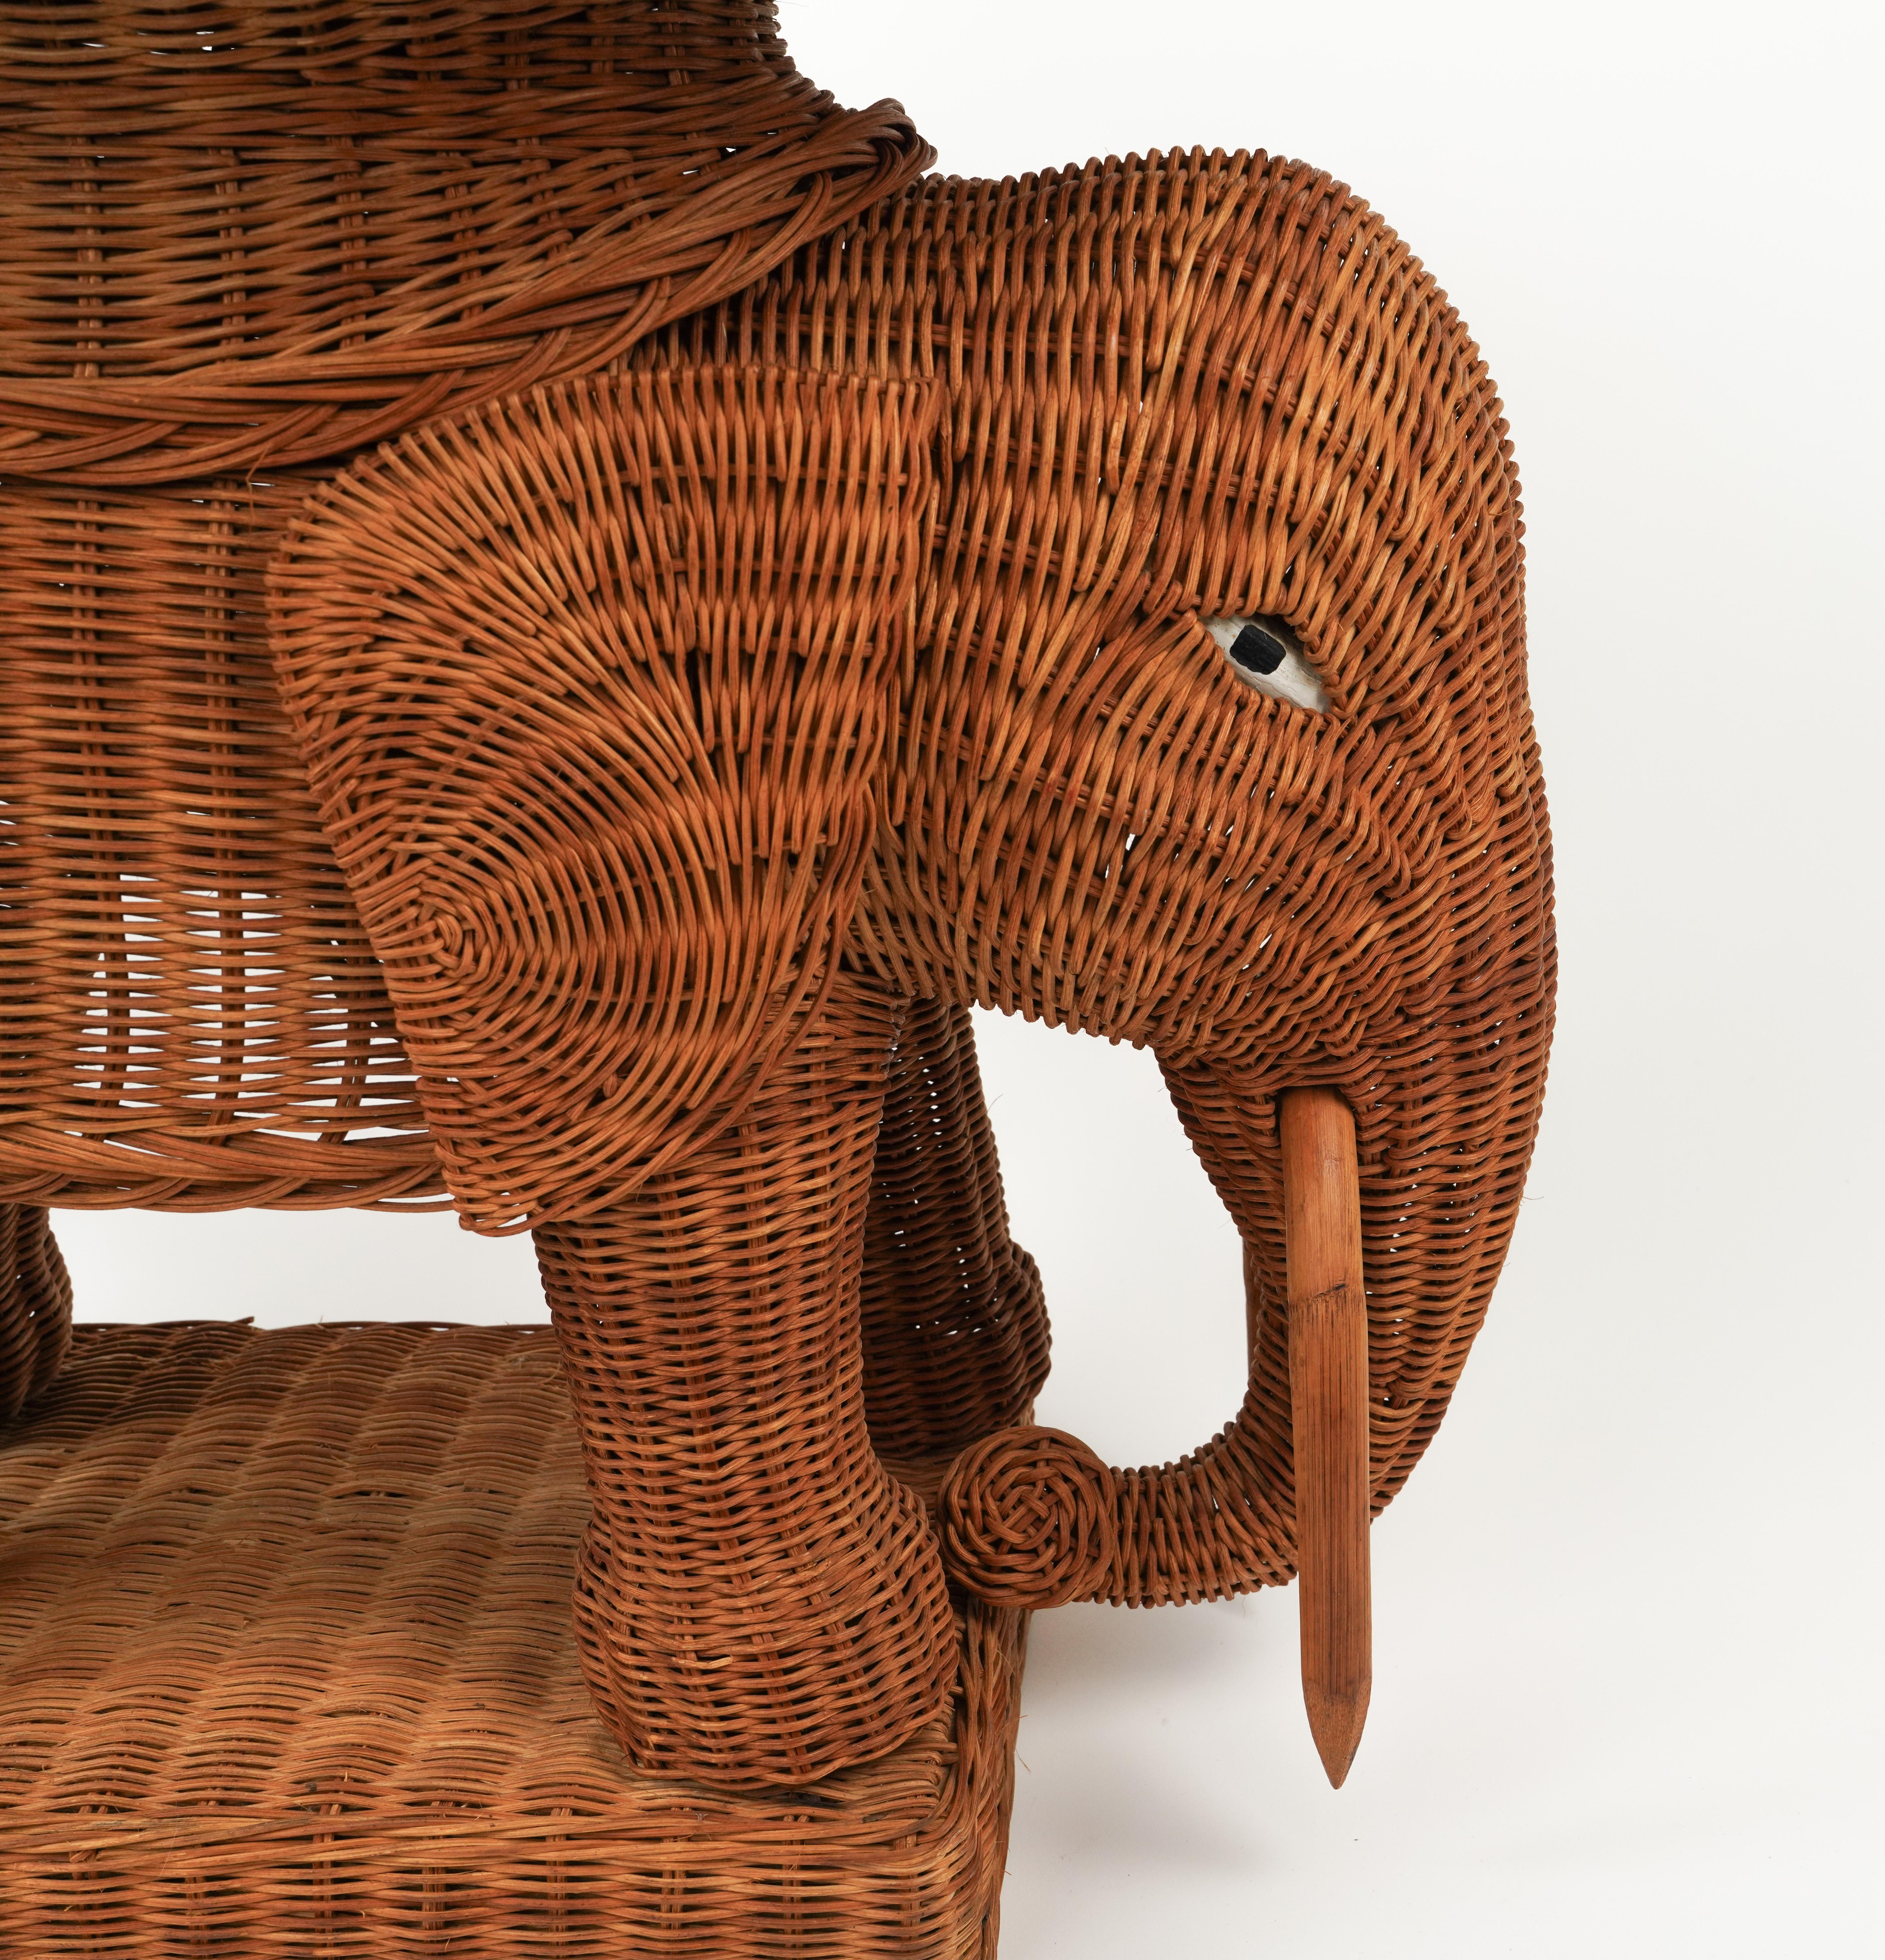 Rattan and Wicker Elephant Side Coffee Table Vivai Del Sud Style, Italy, 1960s For Sale 10